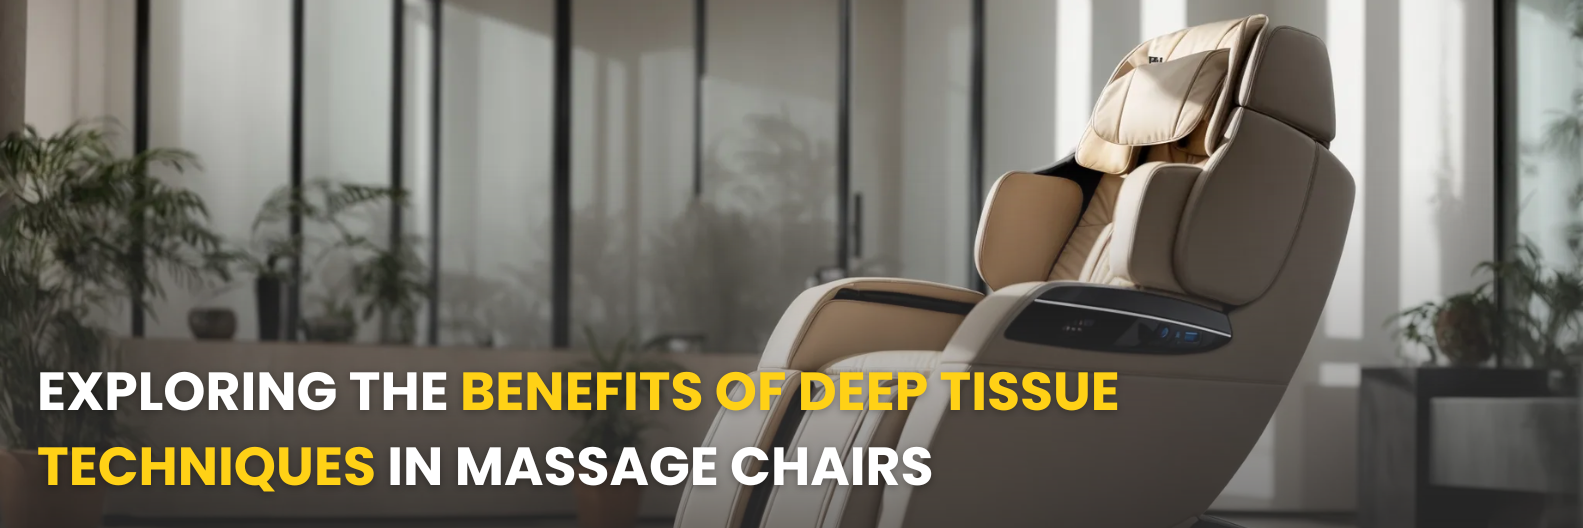 Experience ultimate relaxation with Zero Gravity Massage Chair Techniques from luxury brands like Osaki, Luraco, Infinity, and other top massage chairs for sale.